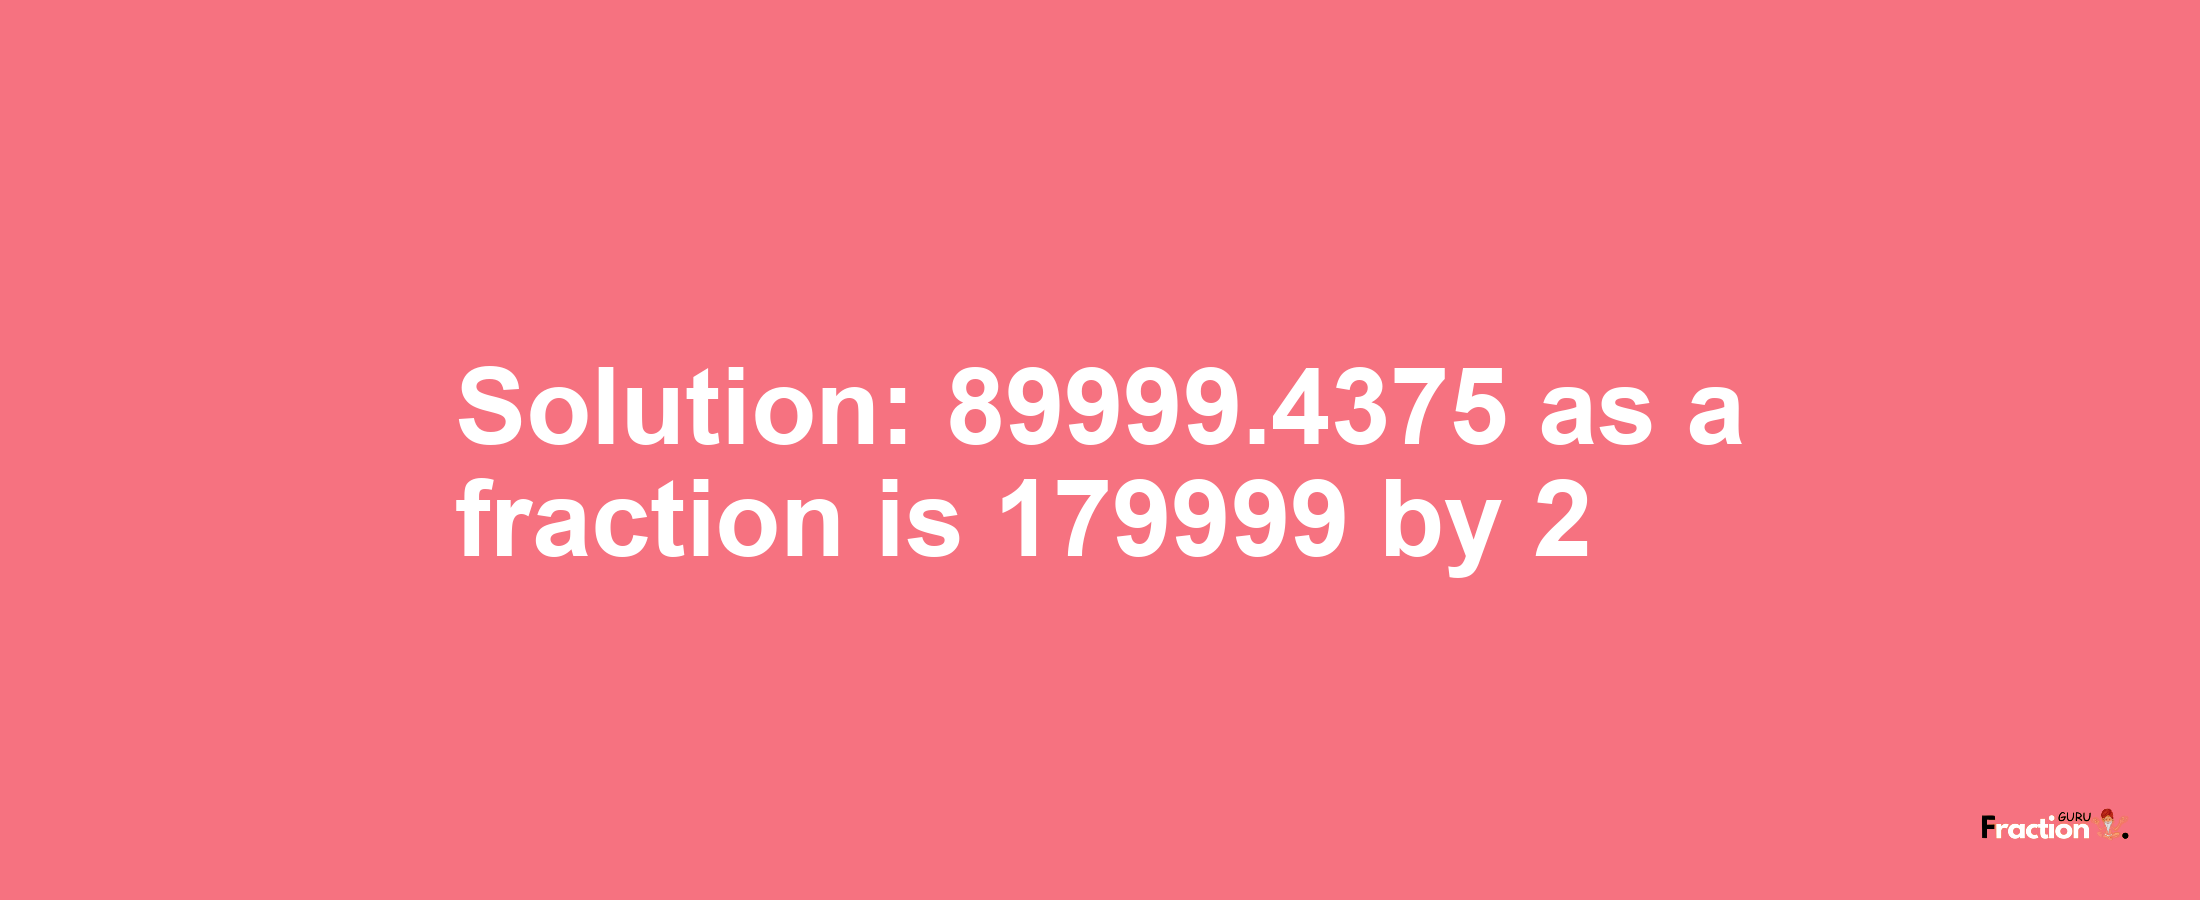 Solution:89999.4375 as a fraction is 179999/2